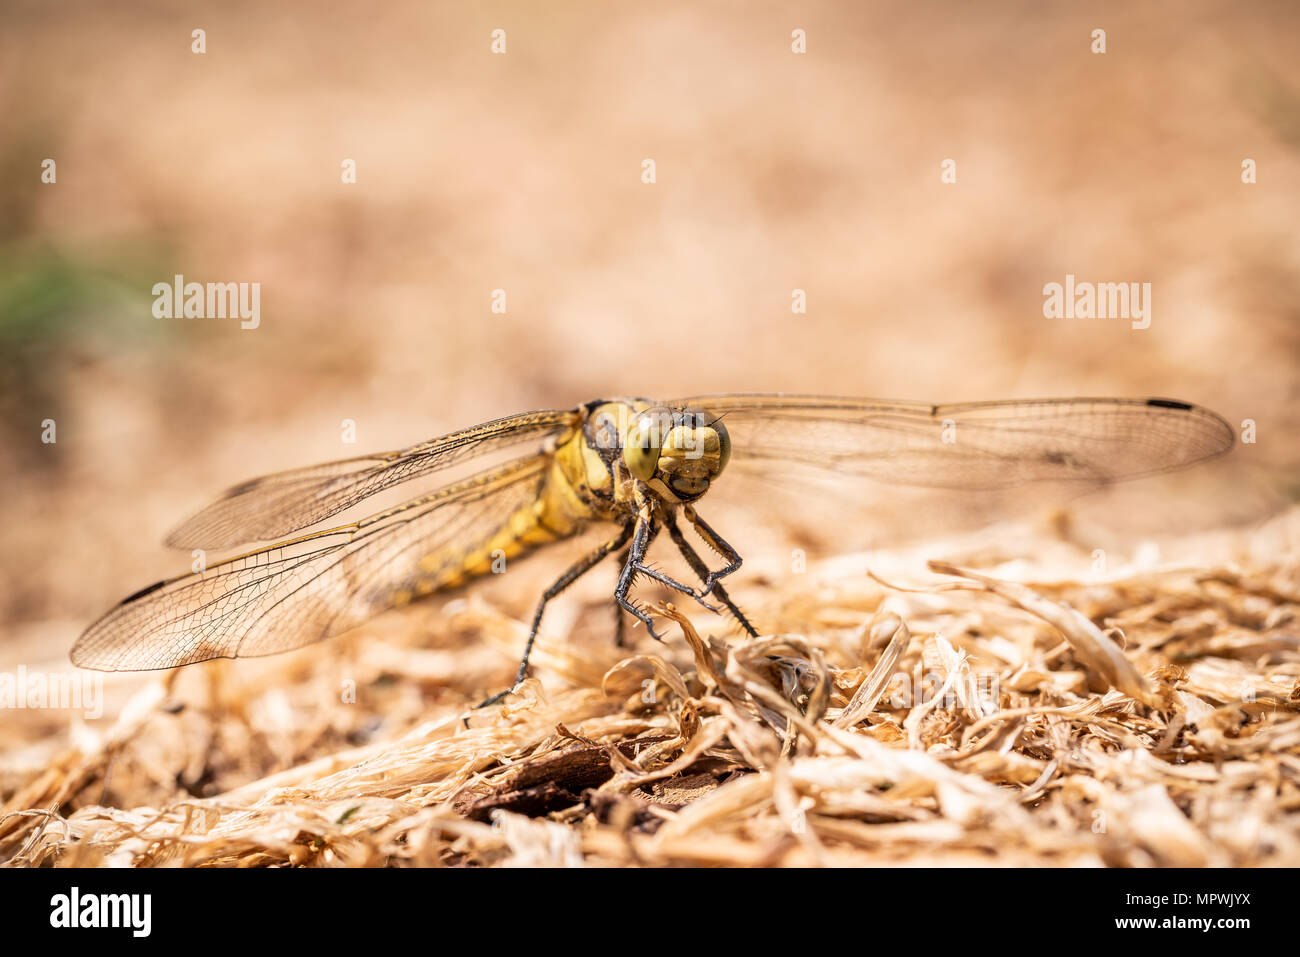 Horizontal close-up photo with big yellow dragonfly. Insect has long transparent wings and big eyes. Bug is perched on the ground covered by dry grass Stock Photo